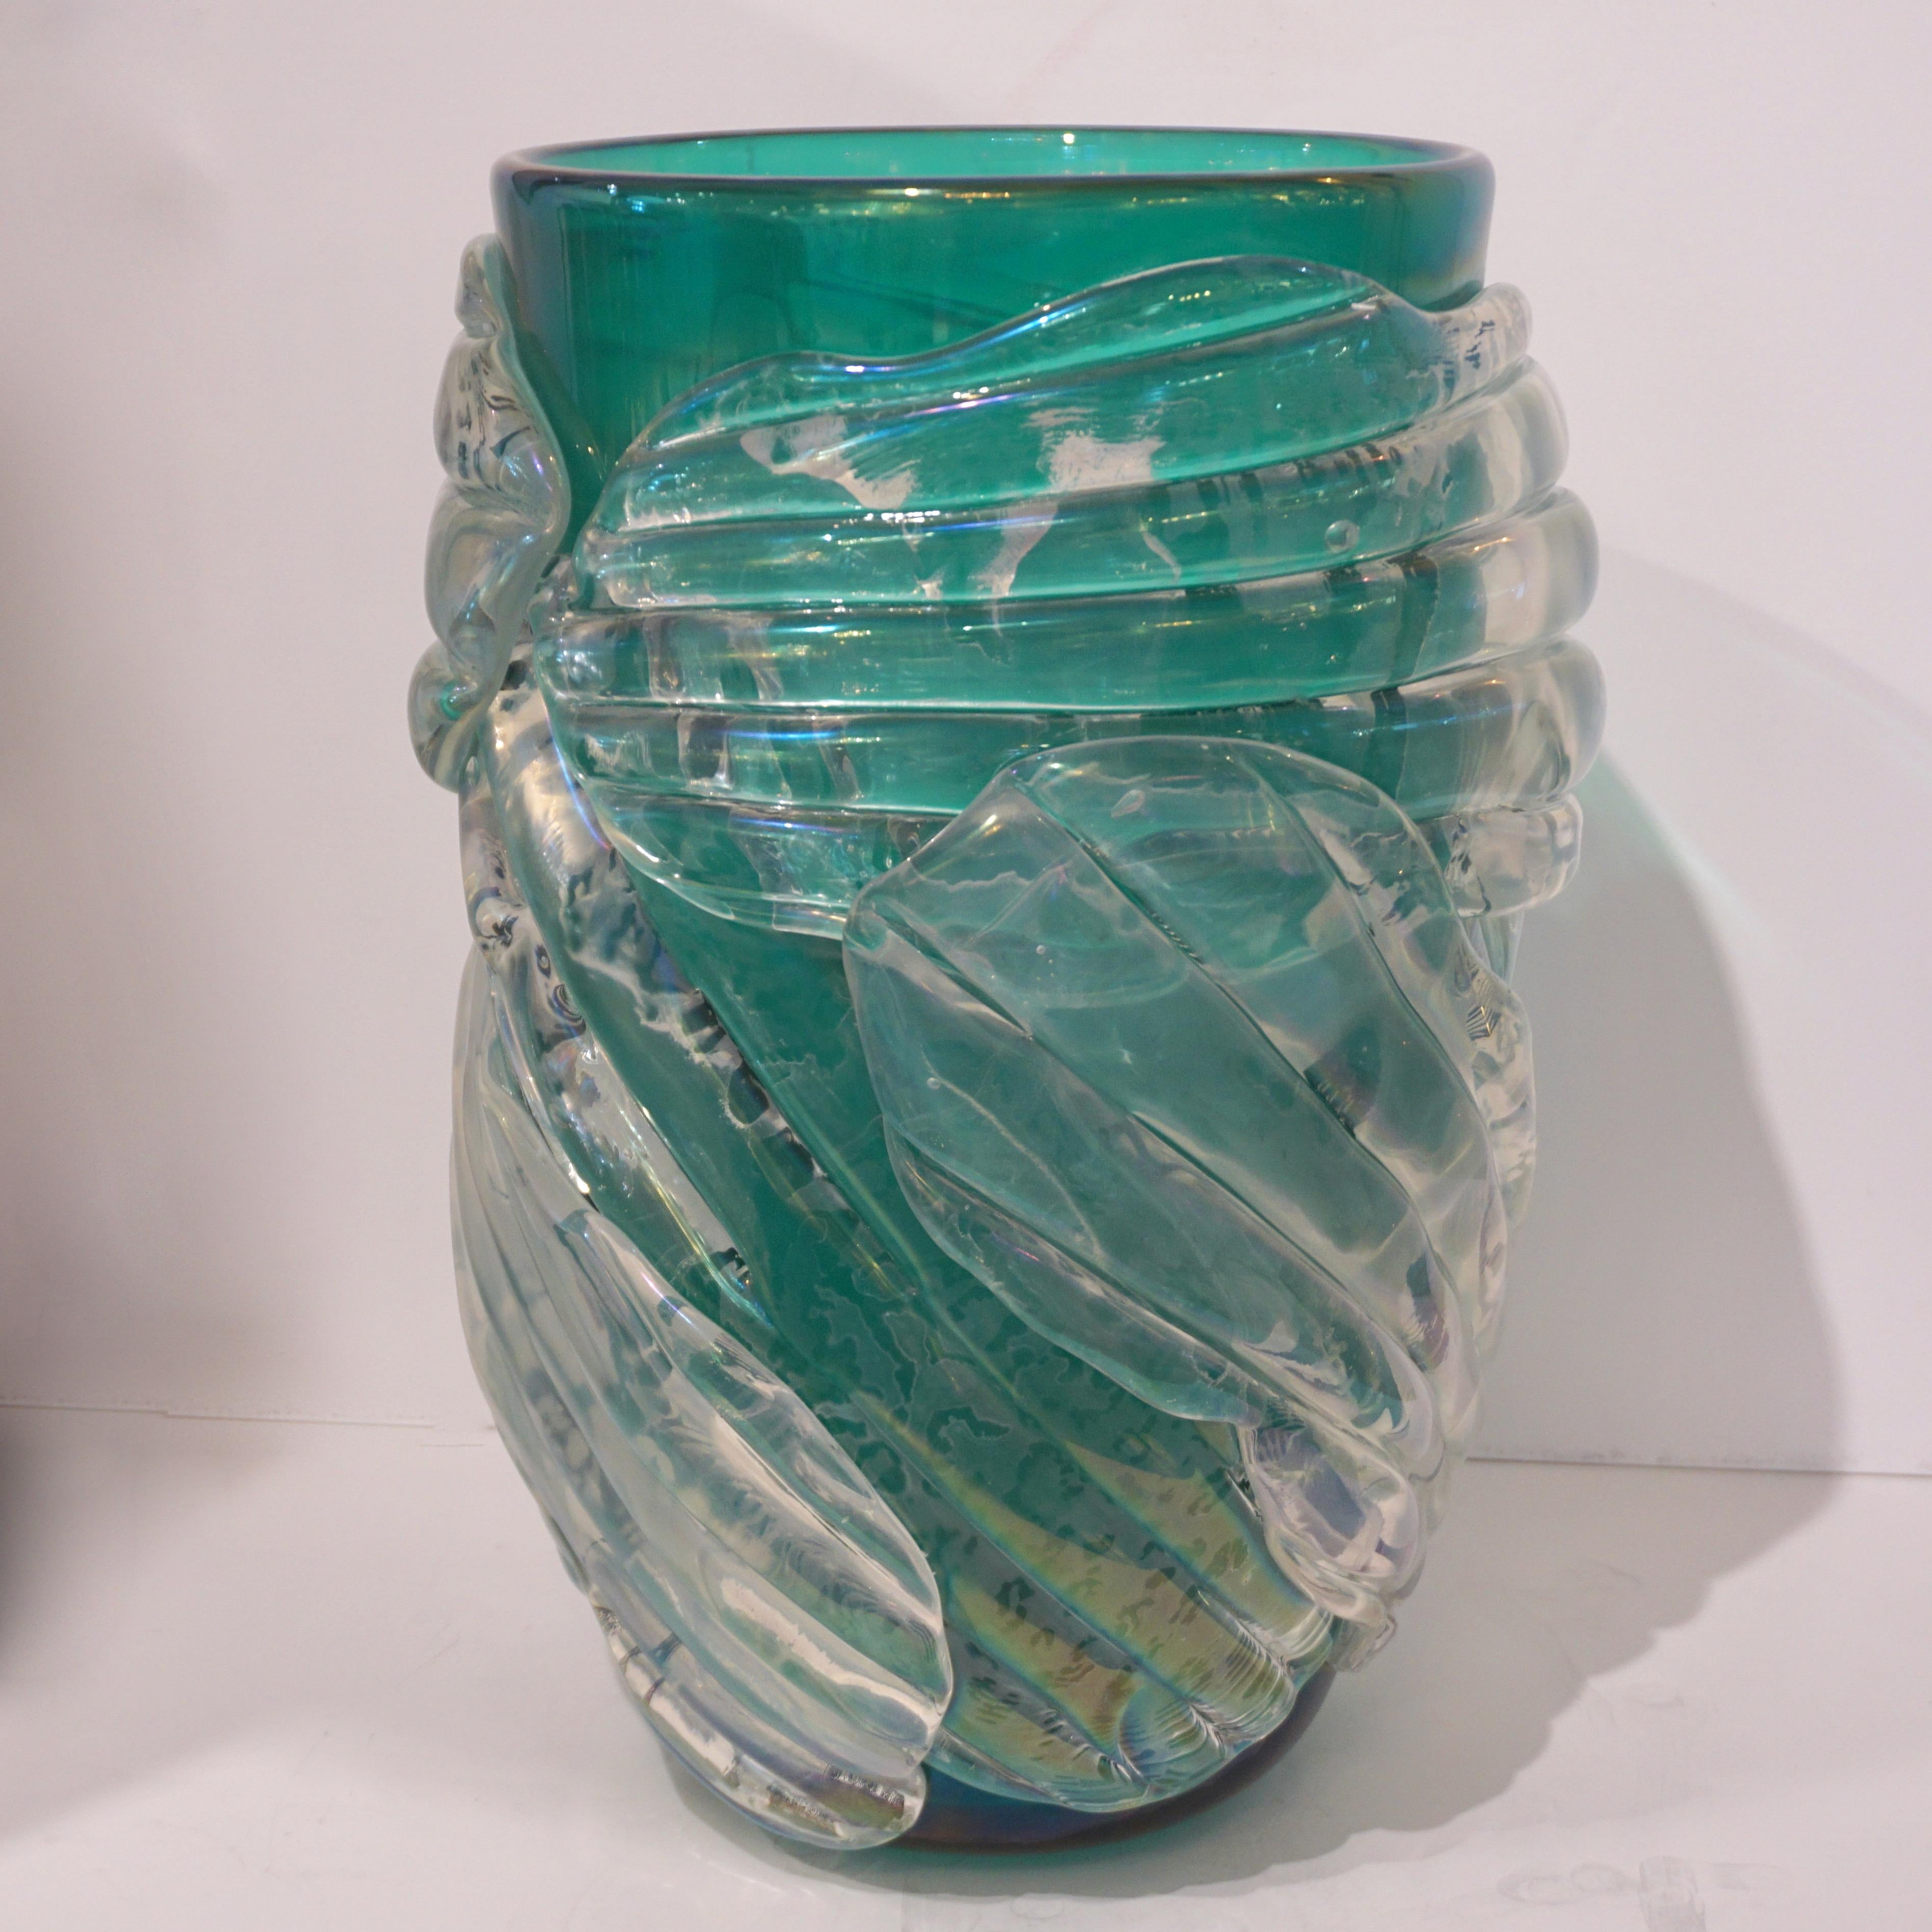 Late 1990s high-quality decorative pair of vases with curated organic design, signed by Cenedese and worked with a sophisticated technique: the bodies in transparent leaf green Murano glass are embraced by overlaid crystal clear Murano glass leaves